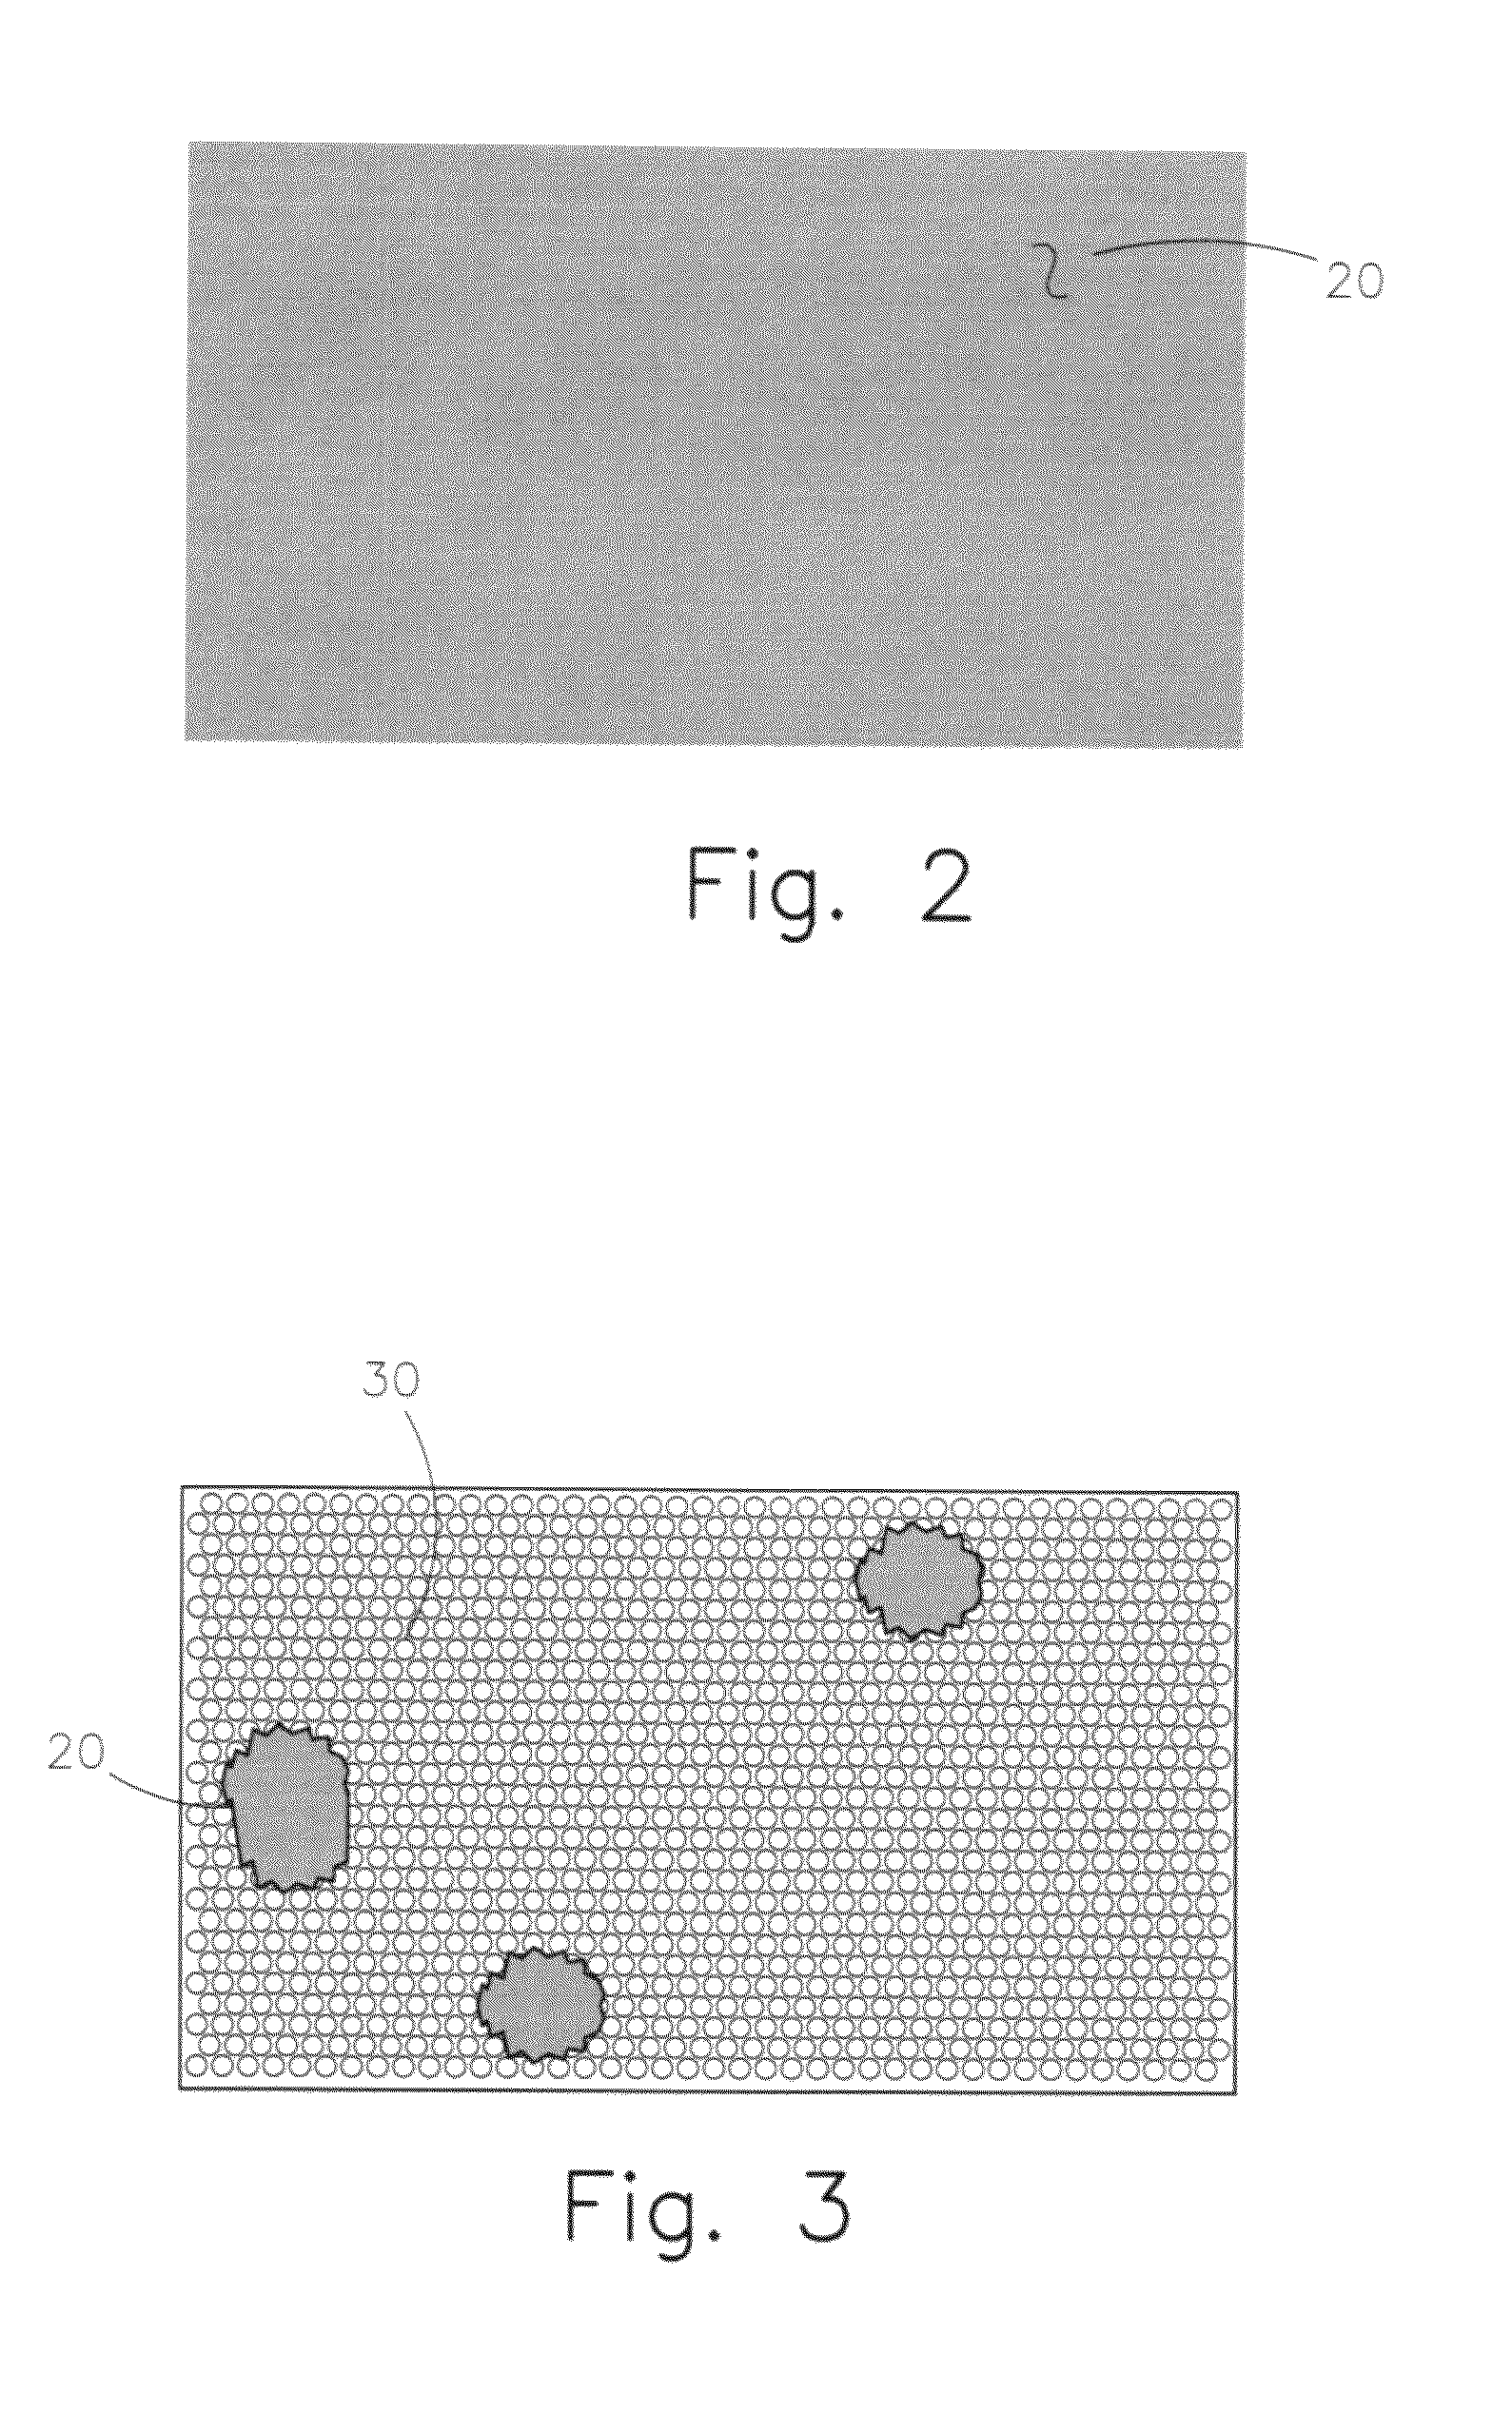 Thermo-sealing control method and packaging for resealable packaging